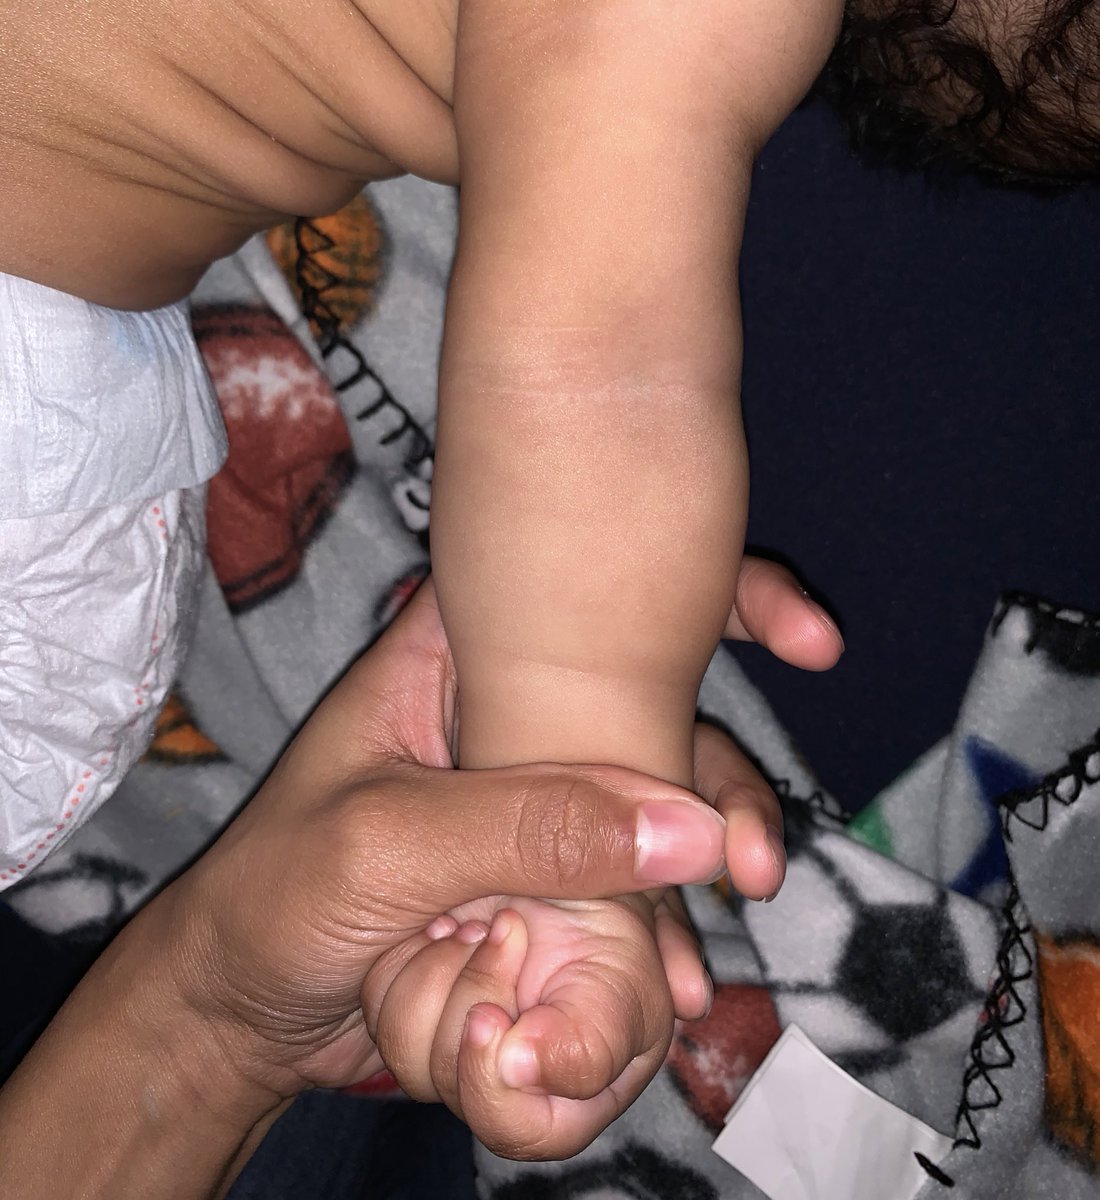 Here’s how I “got rid” of my son’s eczema: